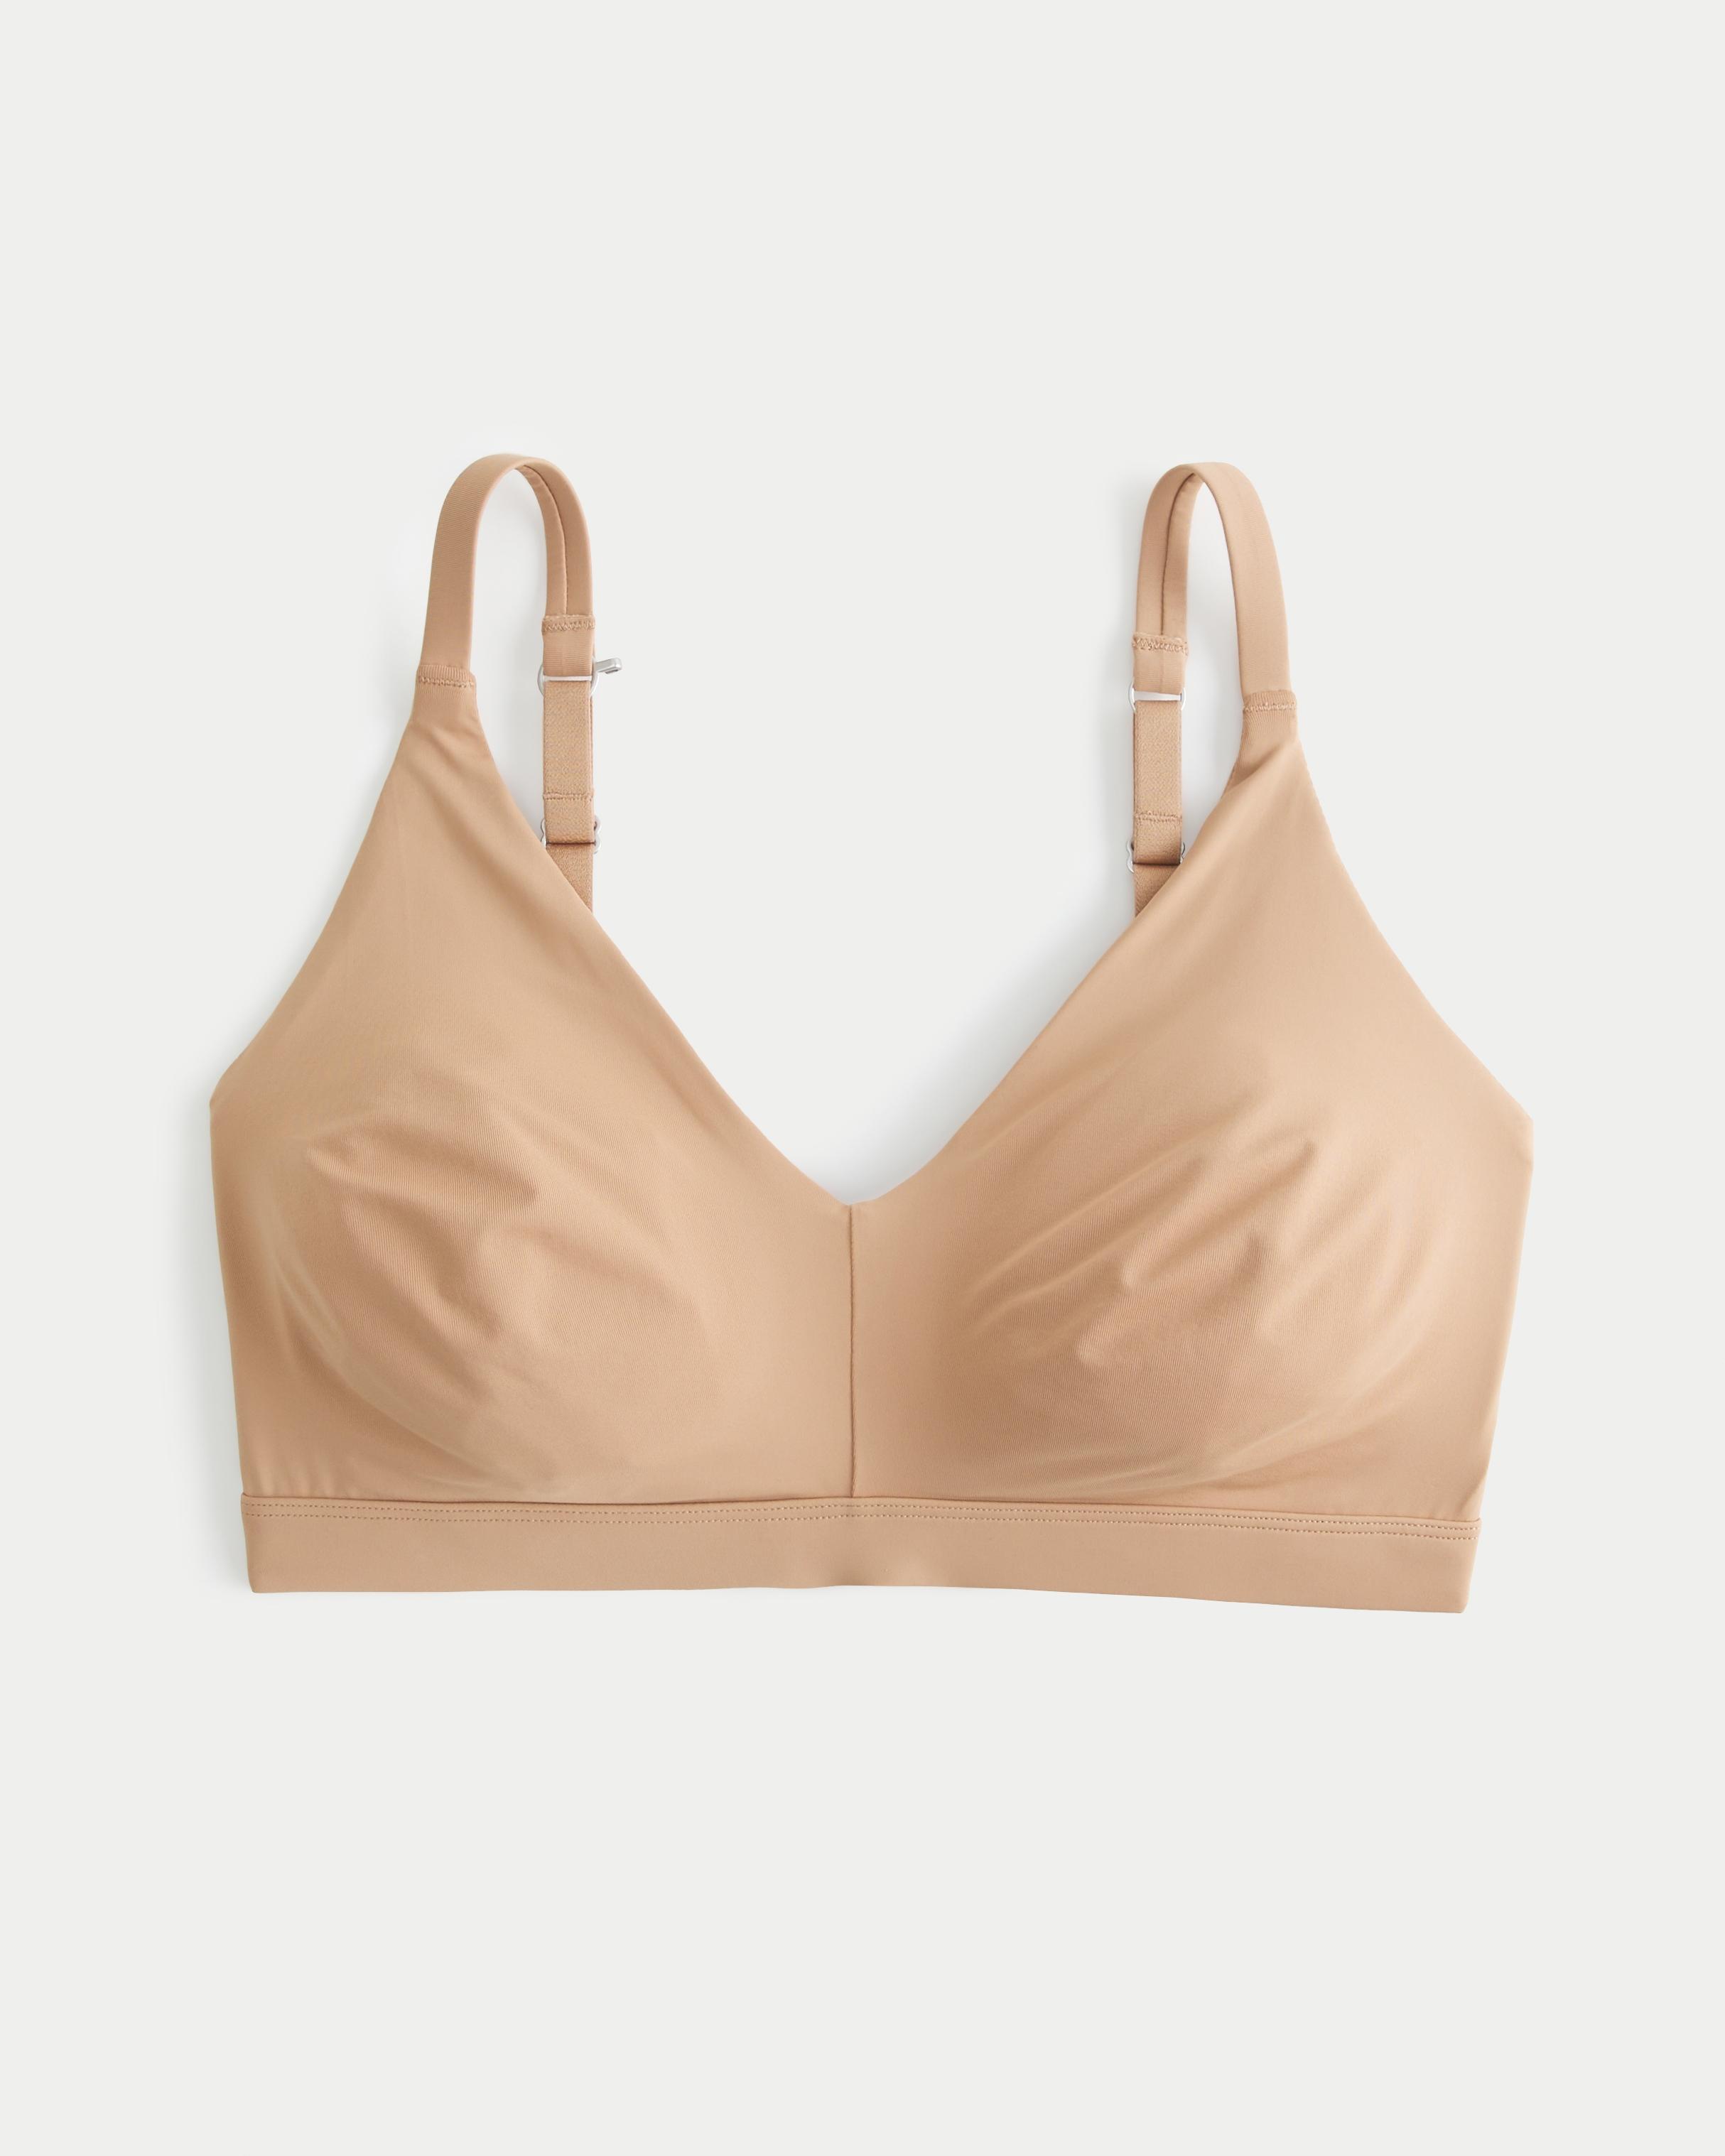 Hollister Gilly Hicks Micro-modal Triangle Bralette in Natural